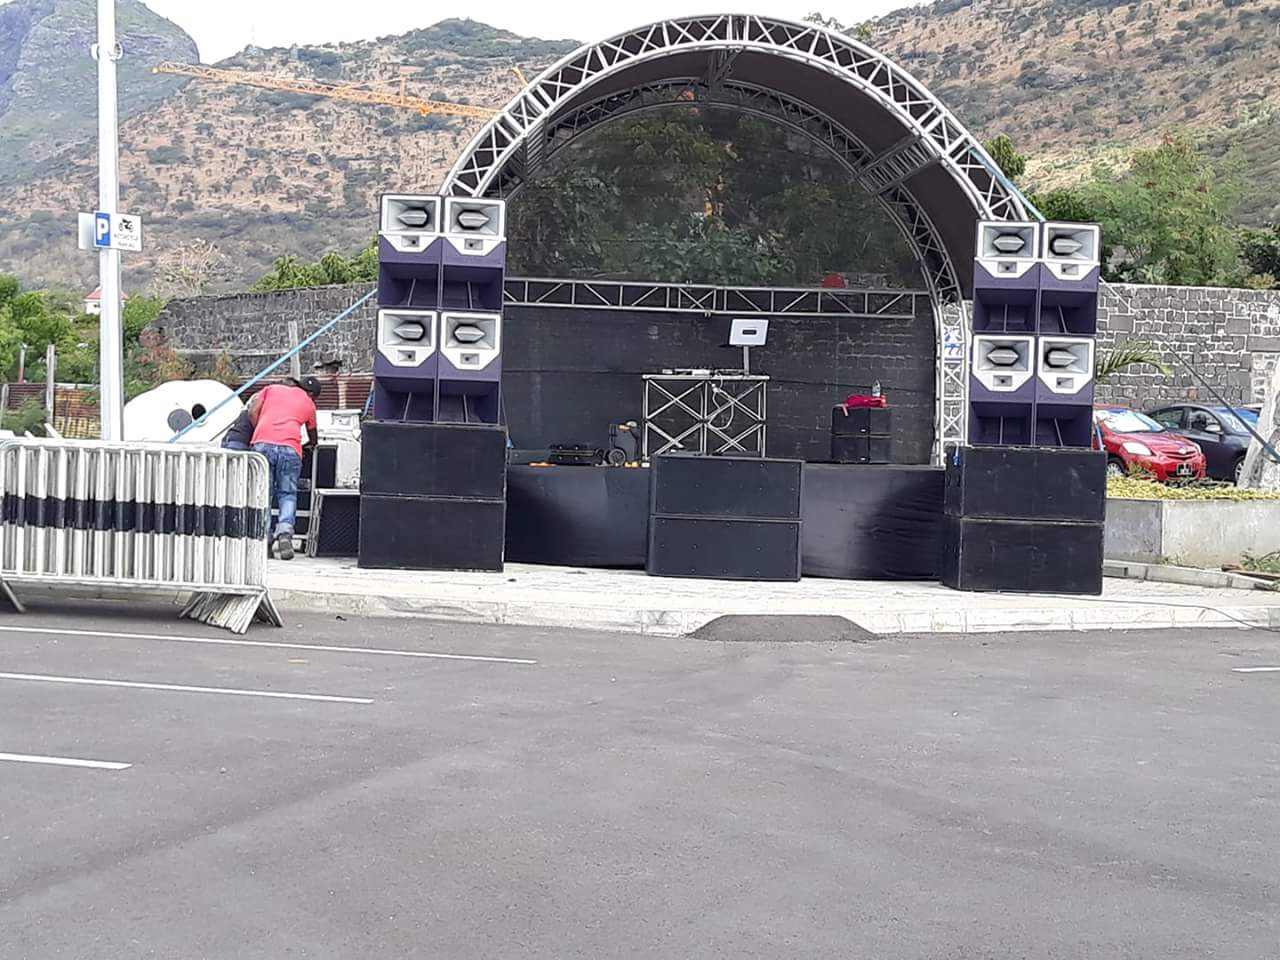 Sanway R2 full range speaker bring an exciting outdoor music concert in Mauritius